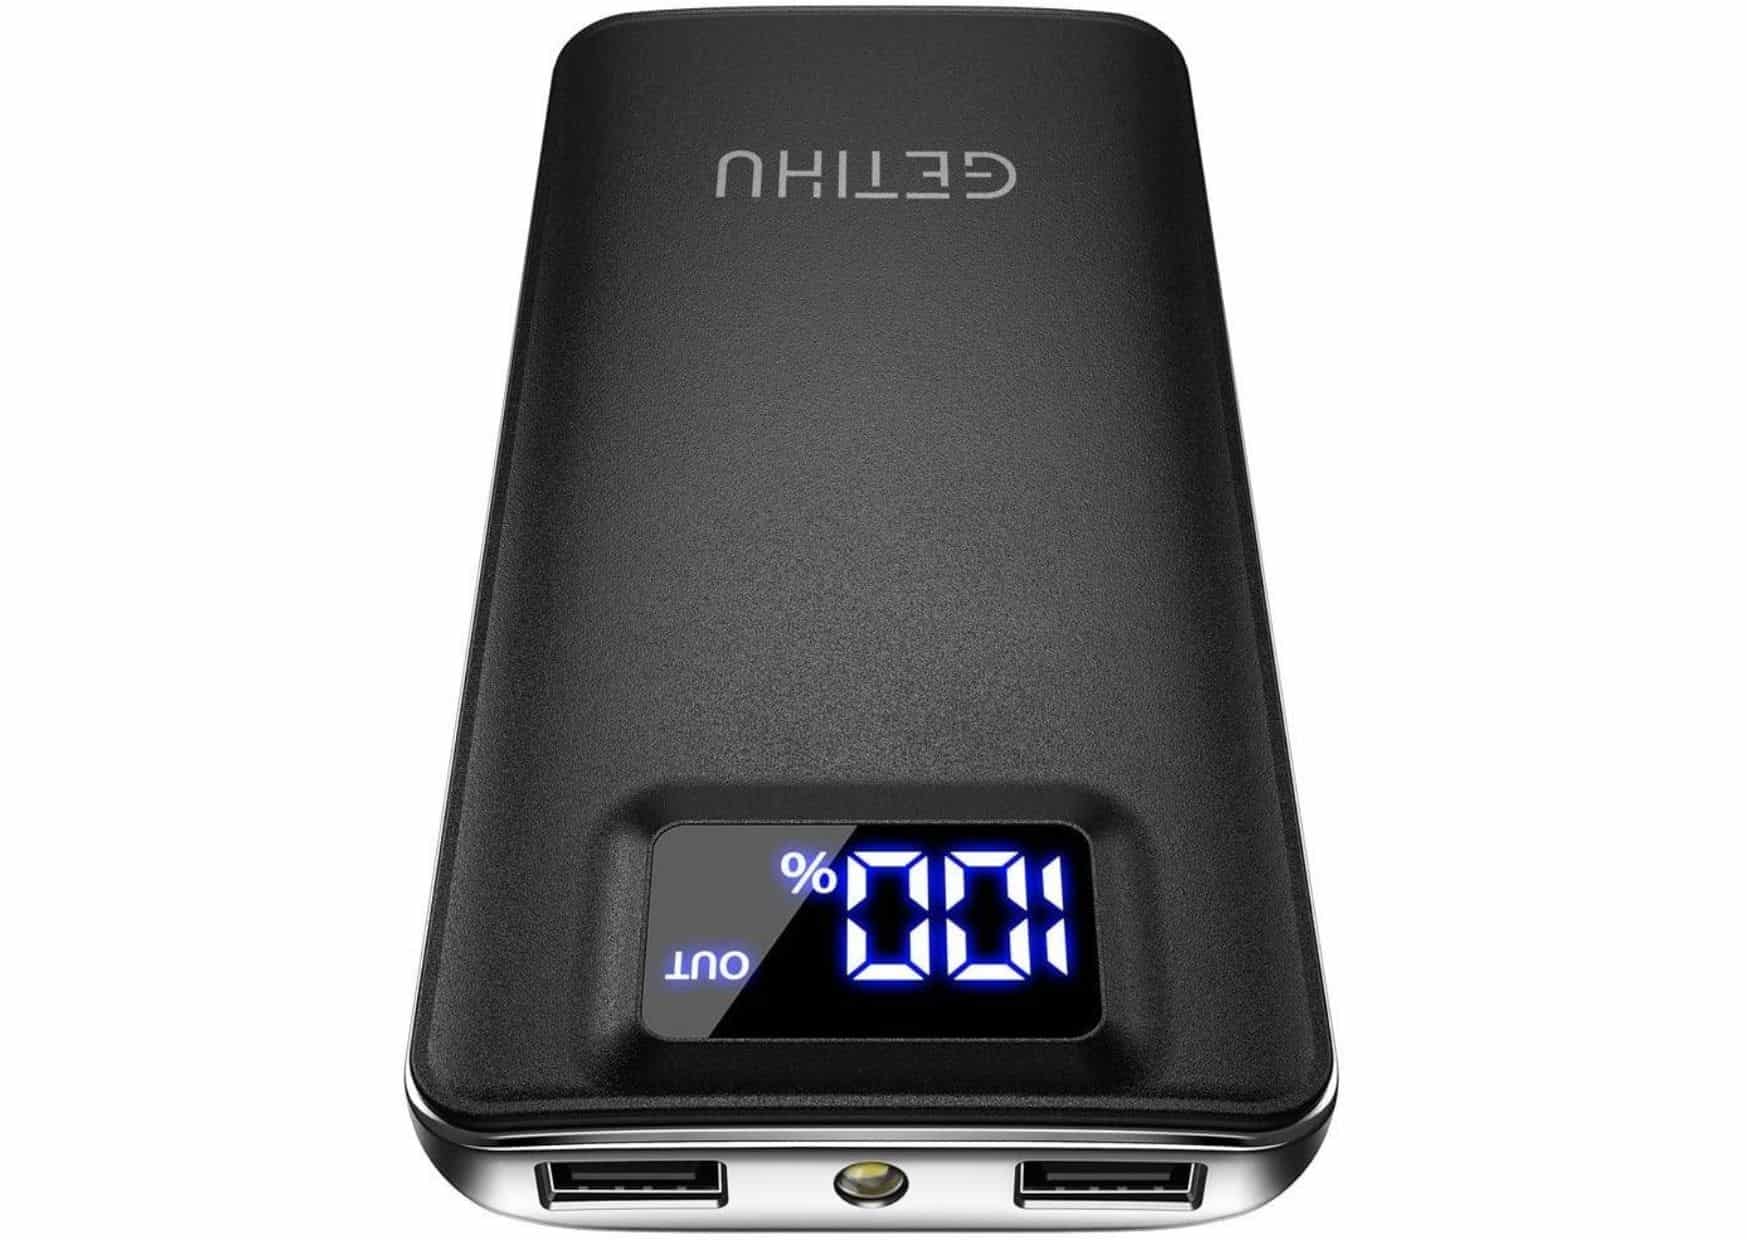 10 Best Power Banks to Top up Your Phone at Will on the Go